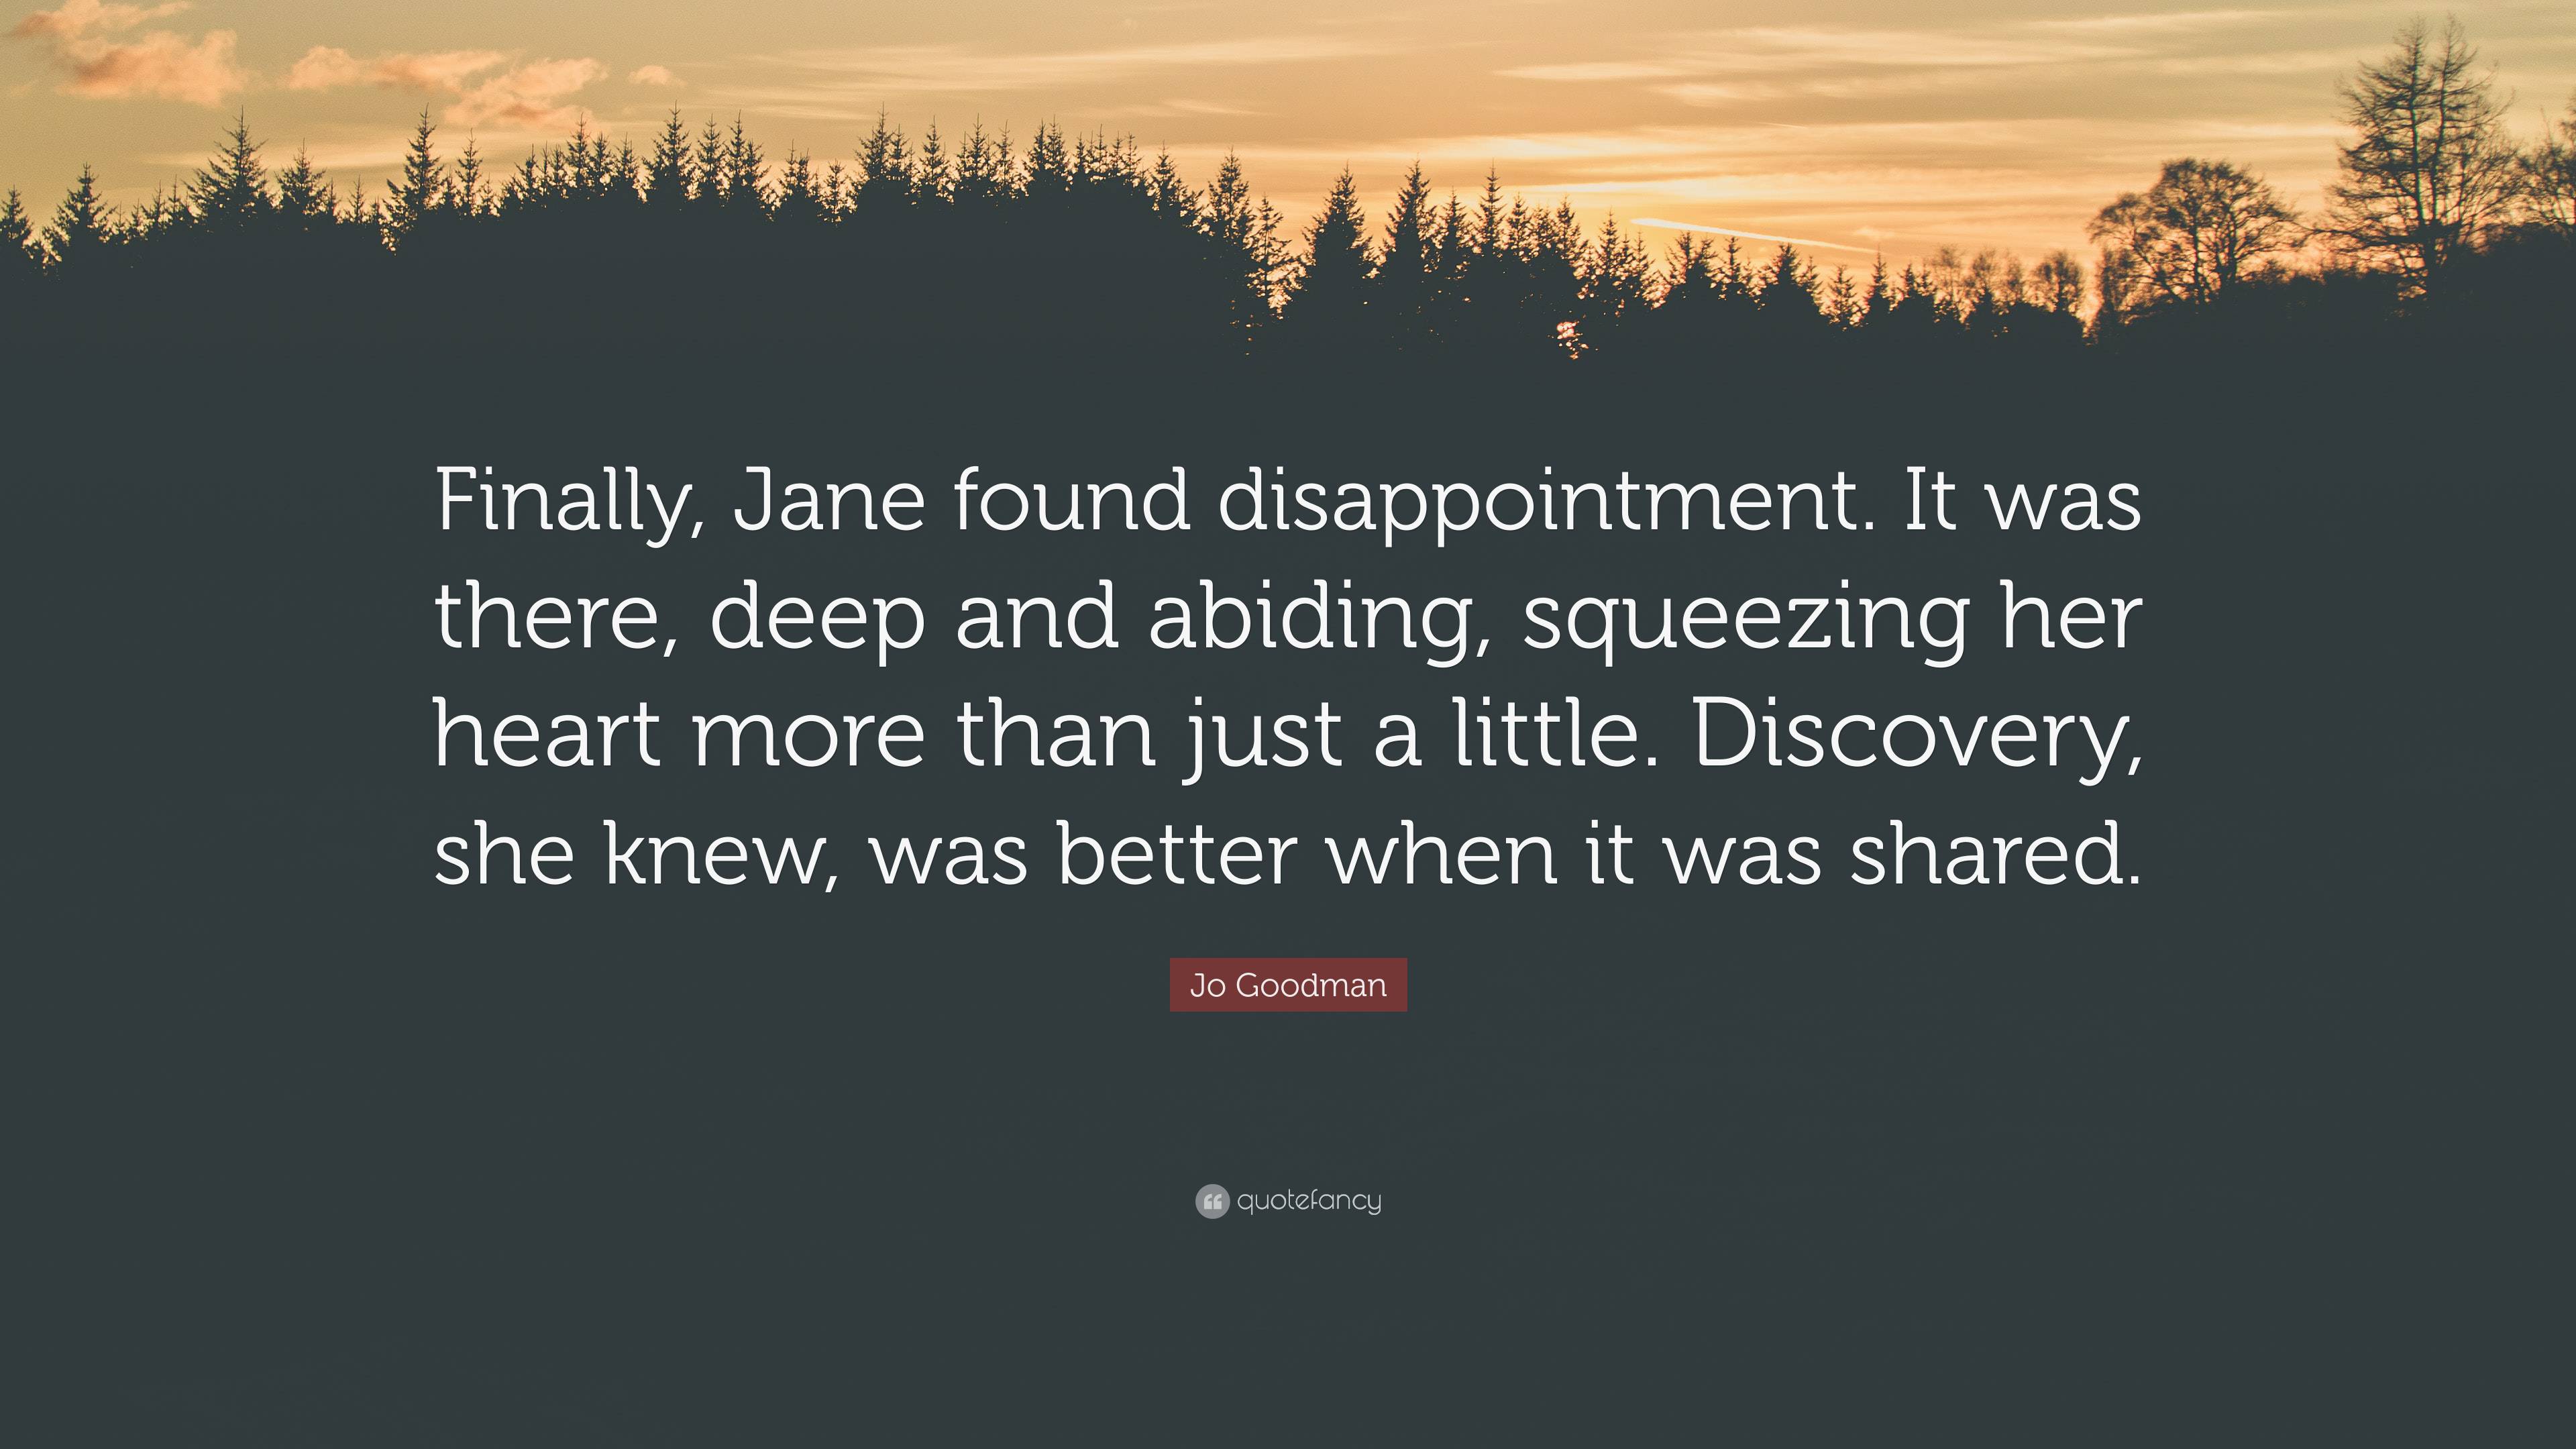 Jo Goodman Quote: “Finally, Jane found disappointment. It was there, deep  and abiding, squeezing her heart more than just a little. Discove”